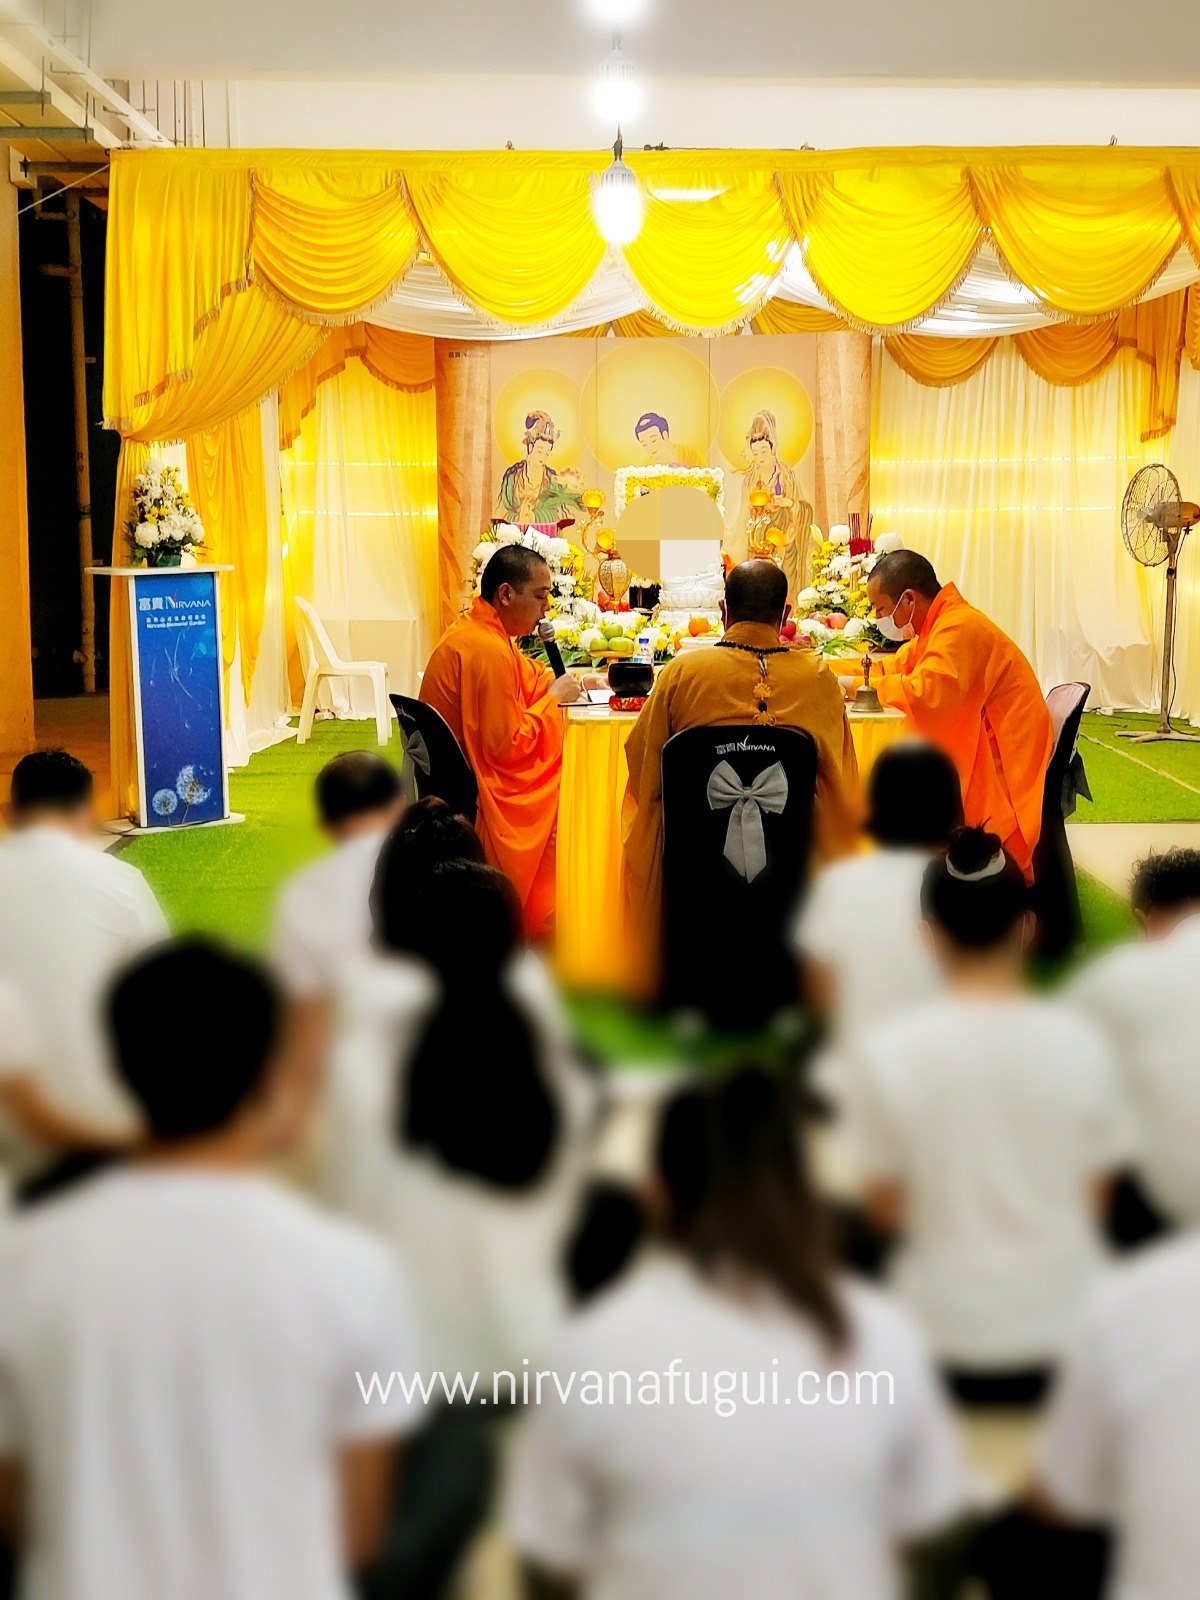 Buddhist monks reciting sutra at a Buddhist funeral rite organised by Nirvana Singapore